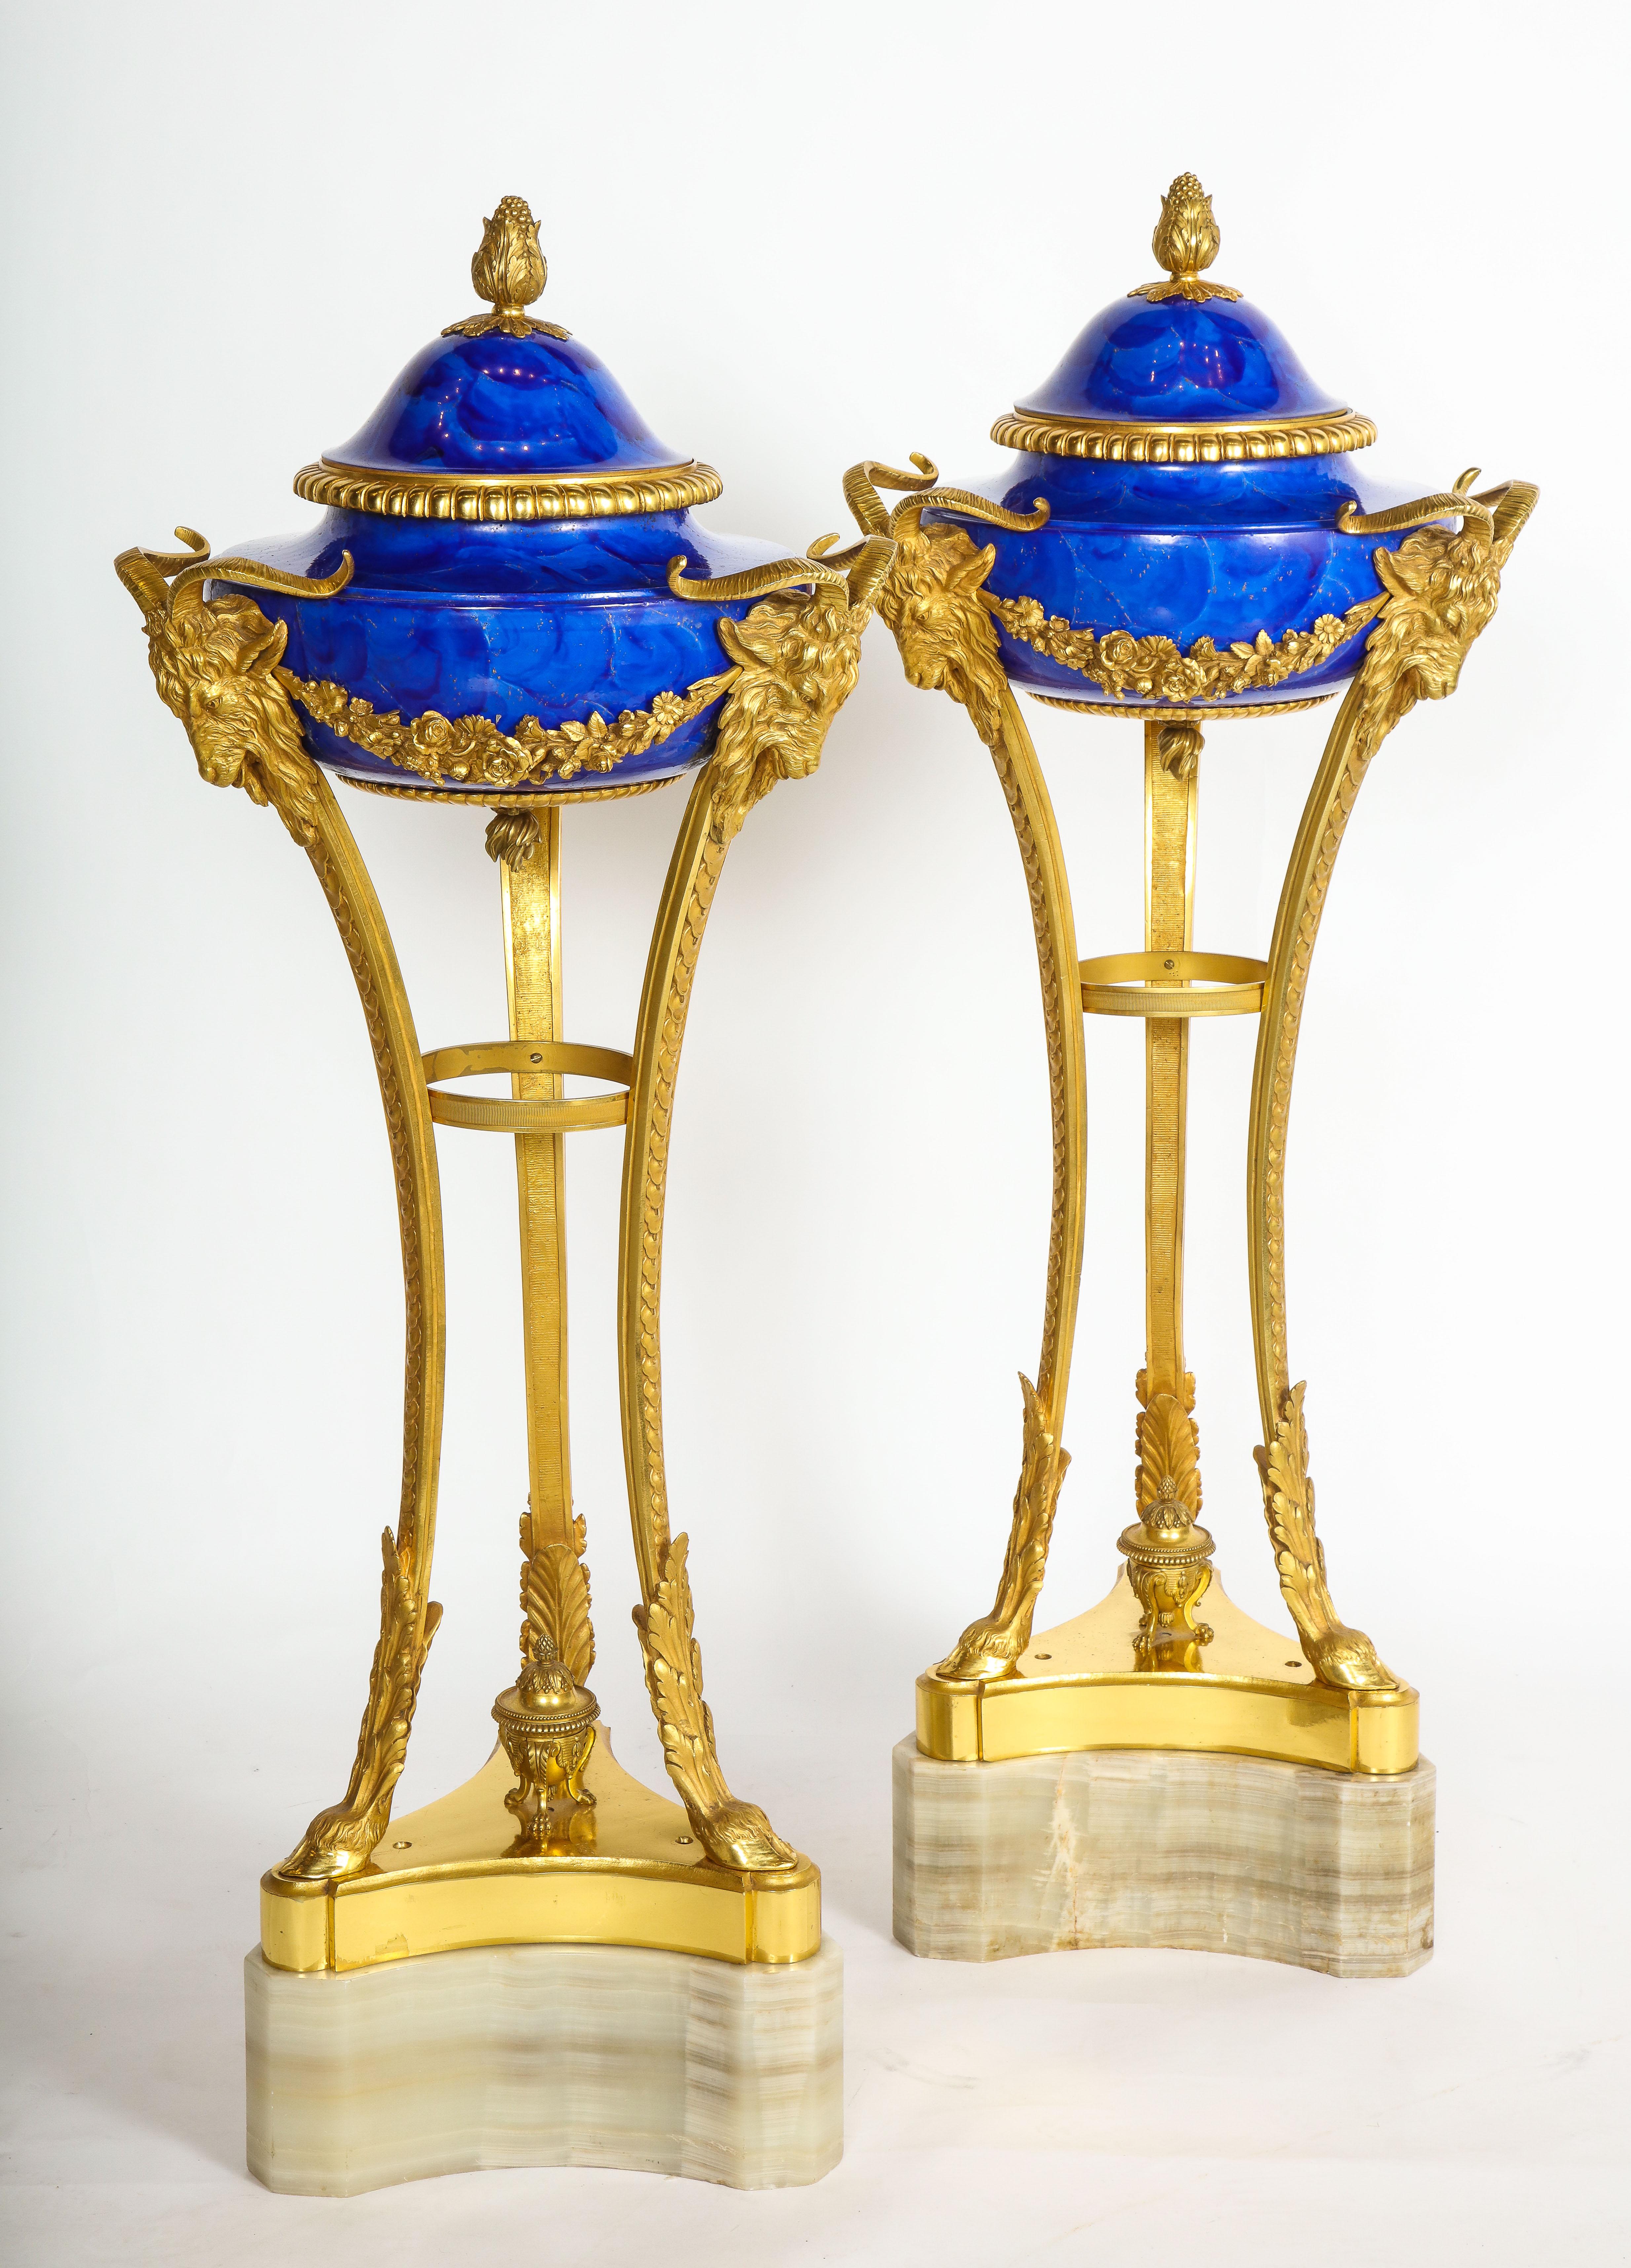 A Monumental Pair of Louis XVI Style Dore Bronze Mounted Faux Lapis Lazuli Hand-Painted Sevres Porcelain Athenians/Cassoulets on a Triangular Onyx Base, Most Probably Commissioned for the King. These are truly a masterpiece. Each section of the